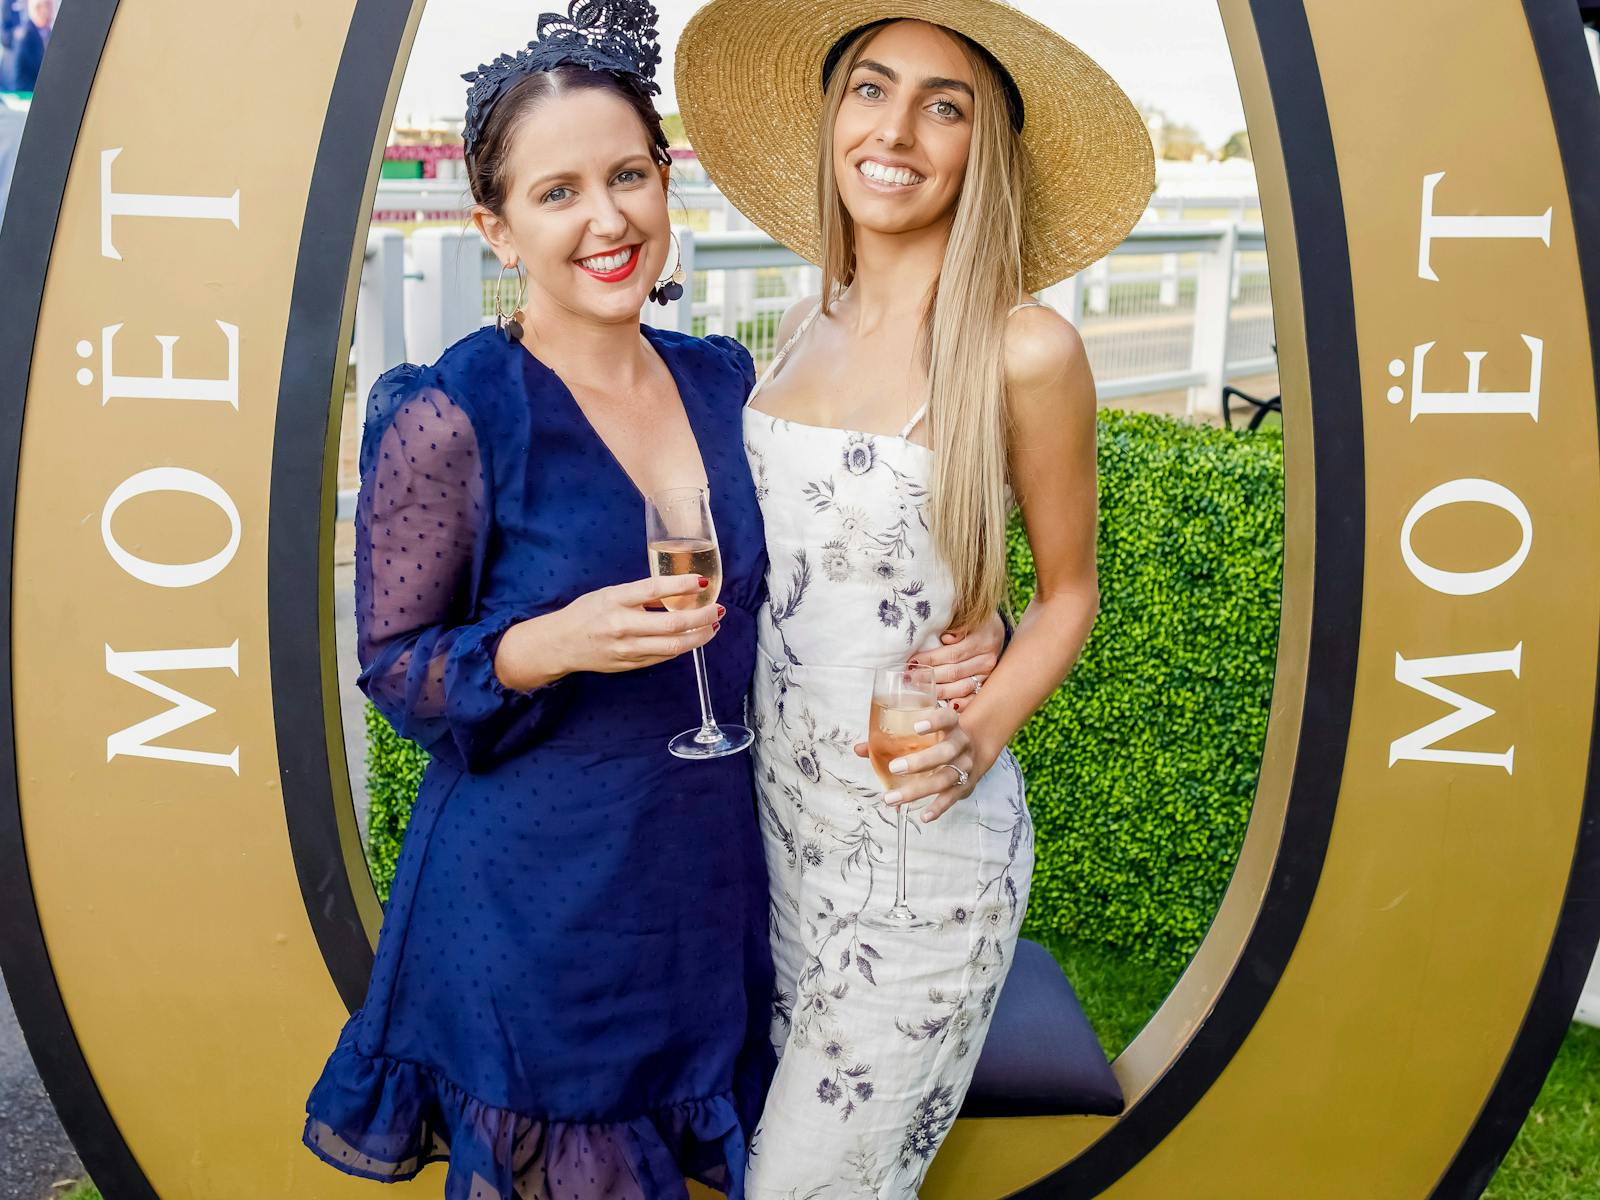 Image for Ladie's Day at Eagle Farm Racecourse